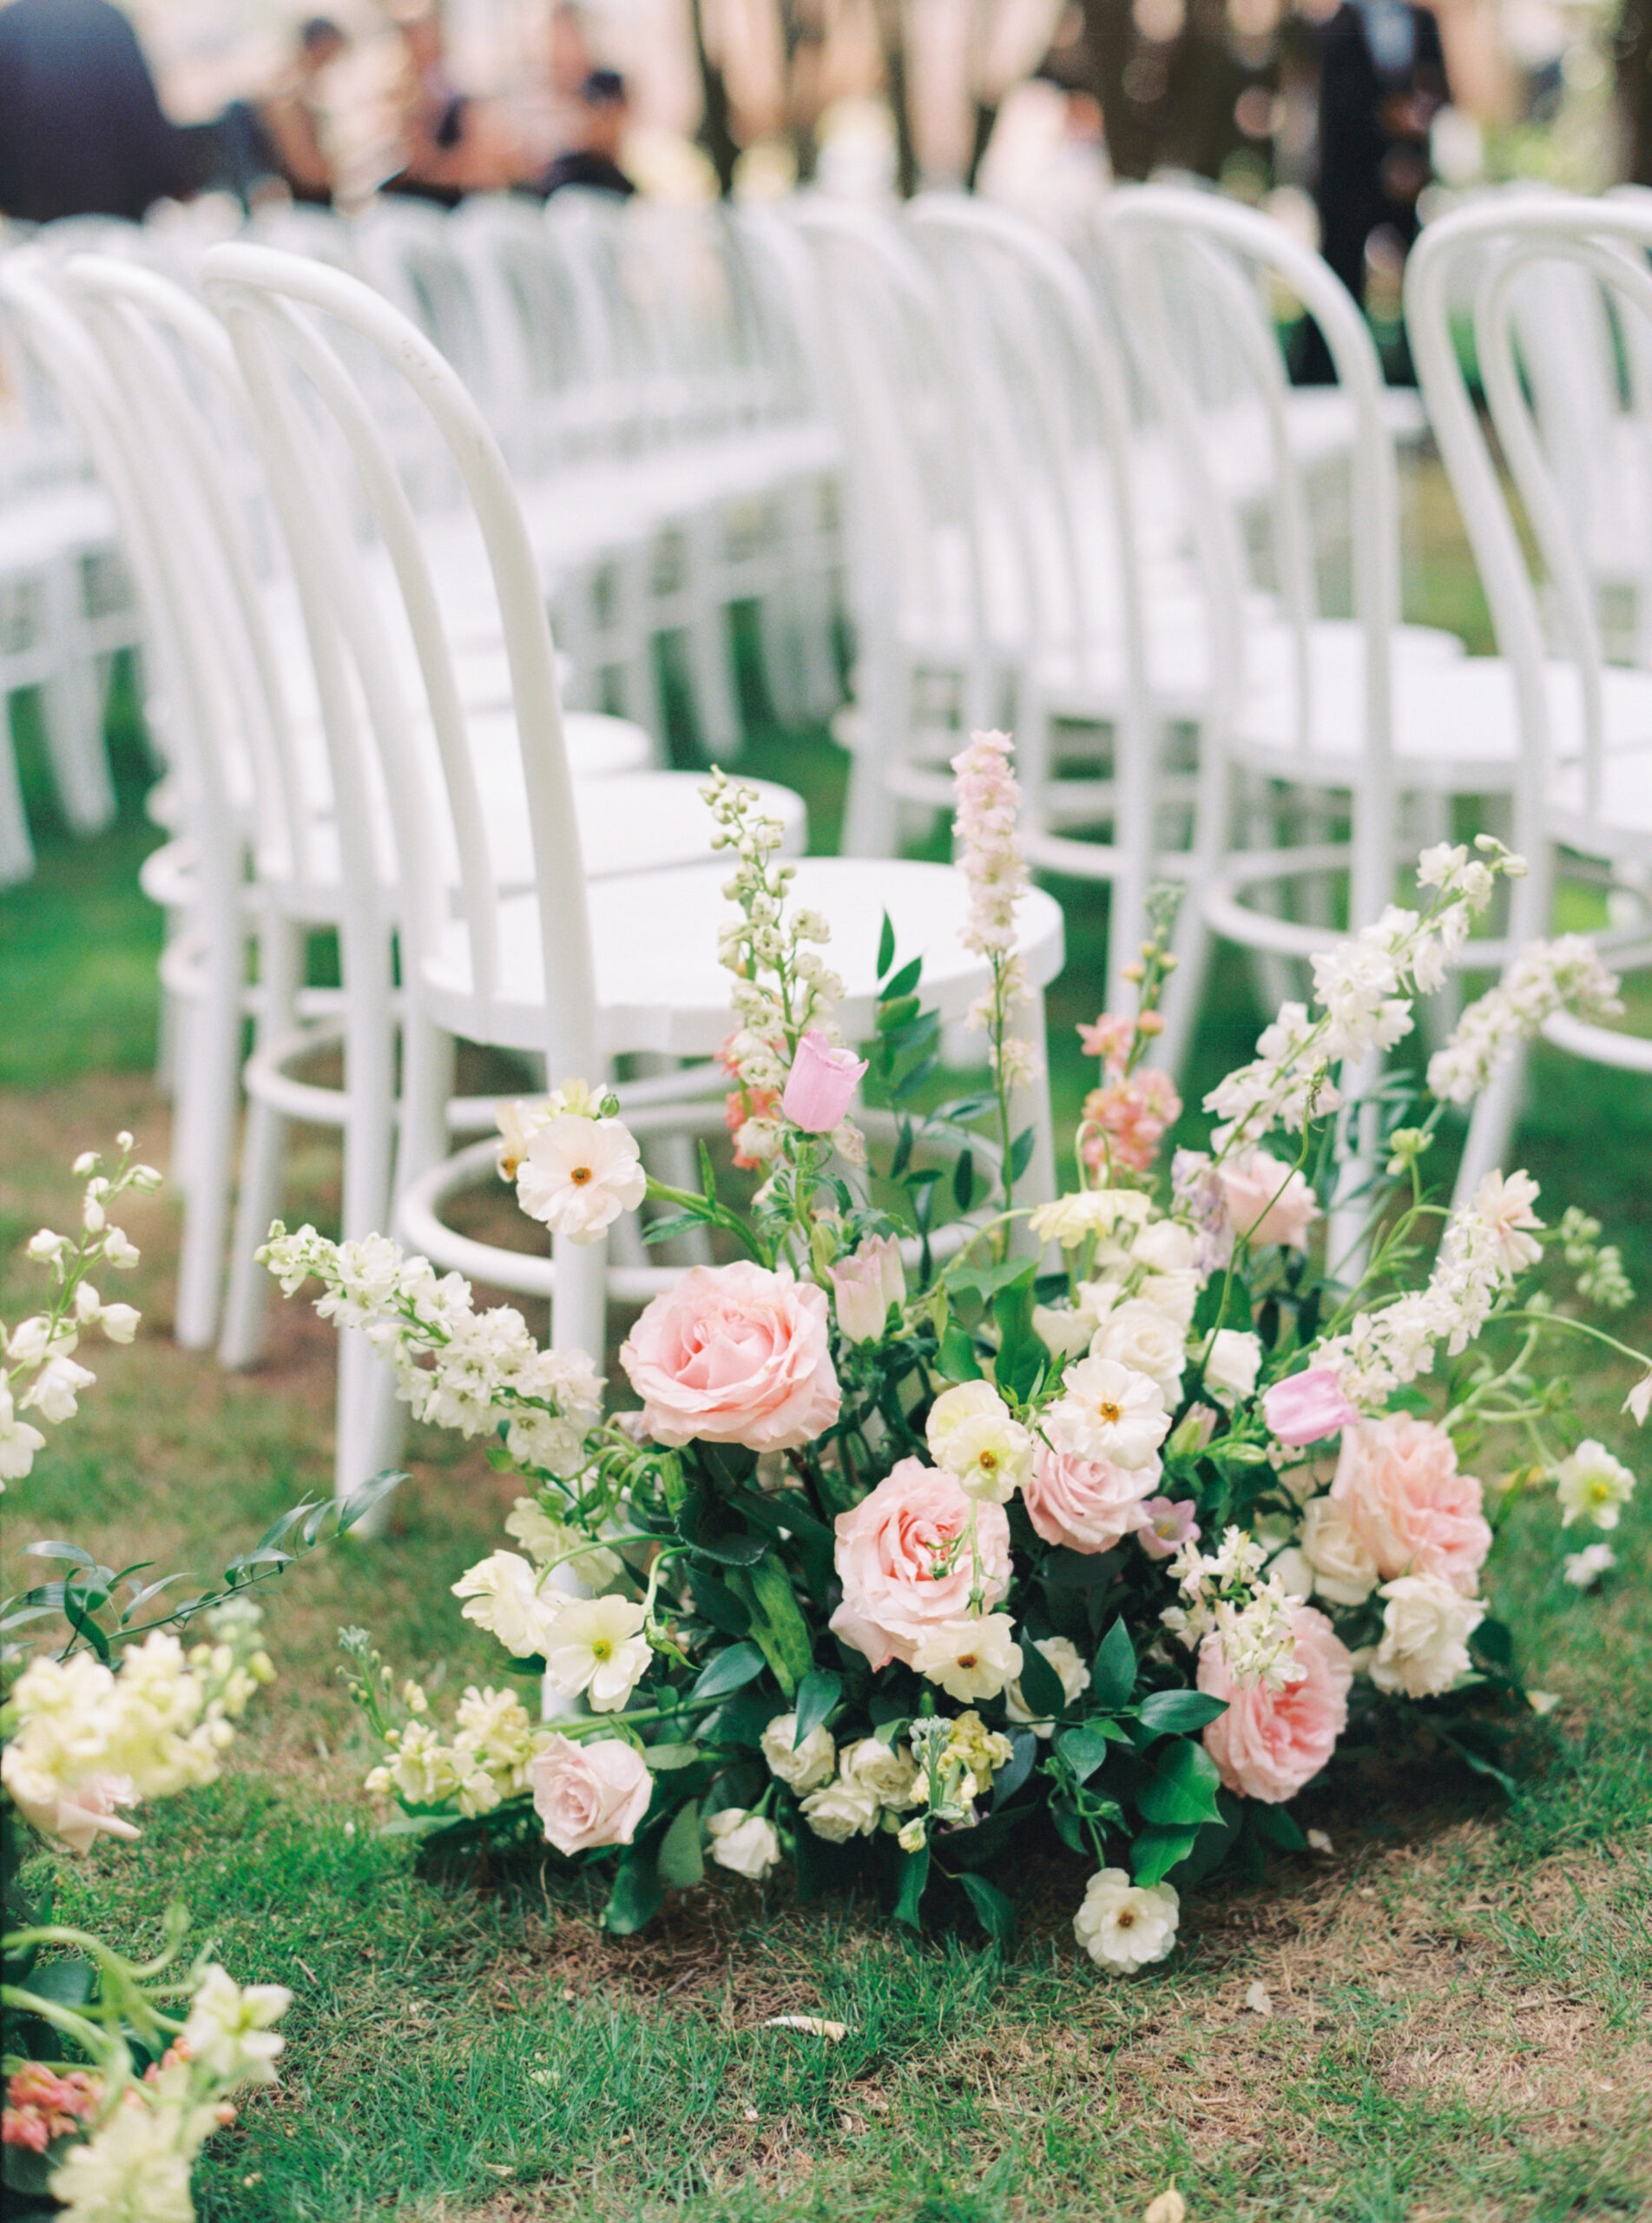 White and pink wedding ceremony aisle flowers with white chairs.